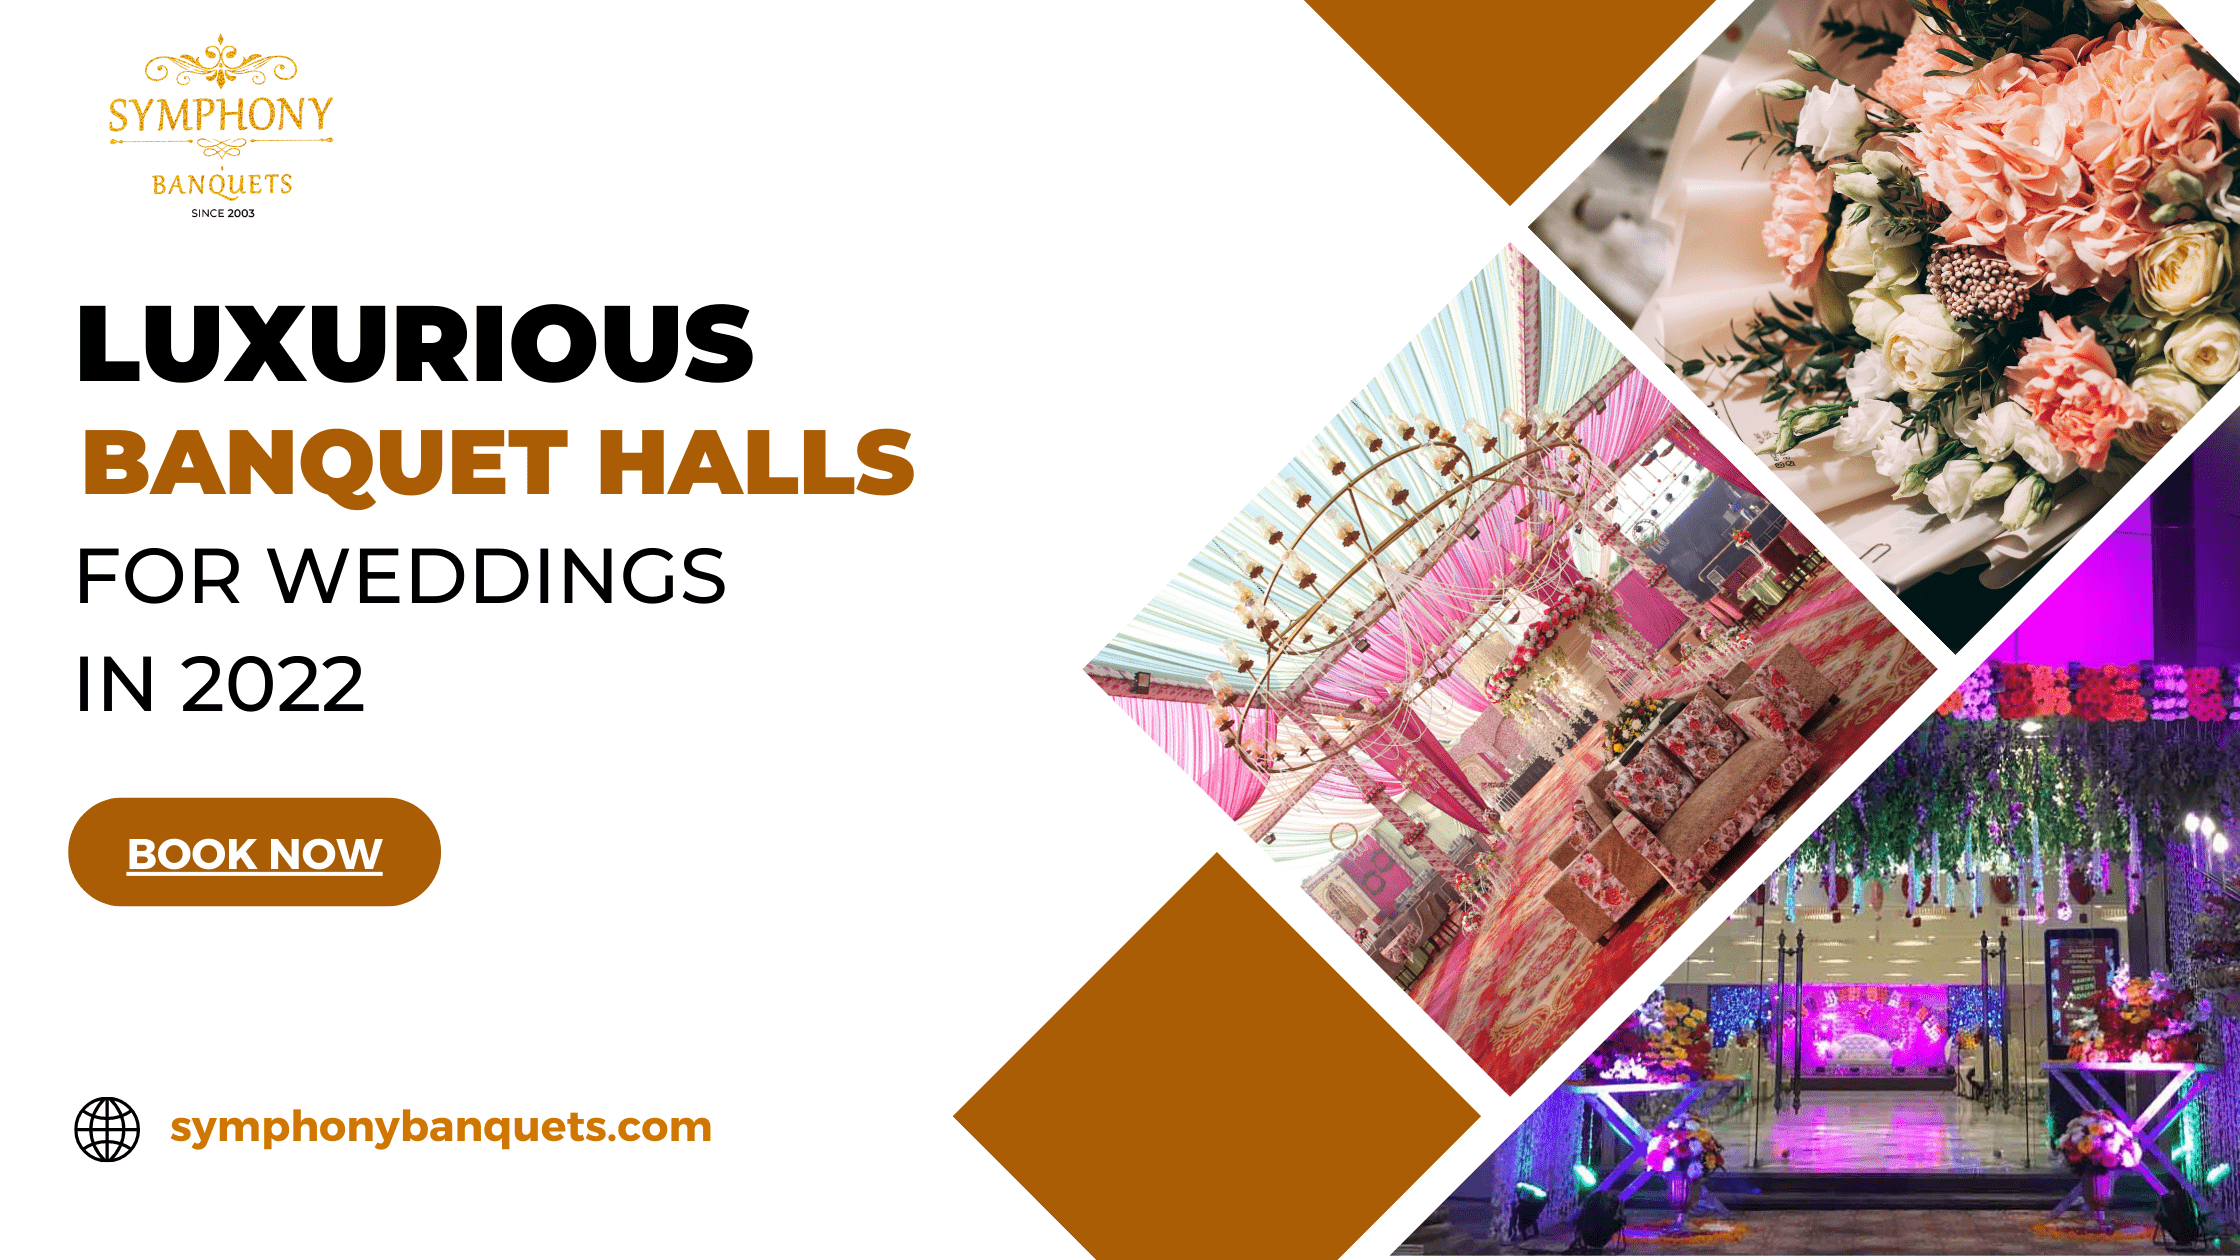 Luxurious banquet halls for weddings in 2022